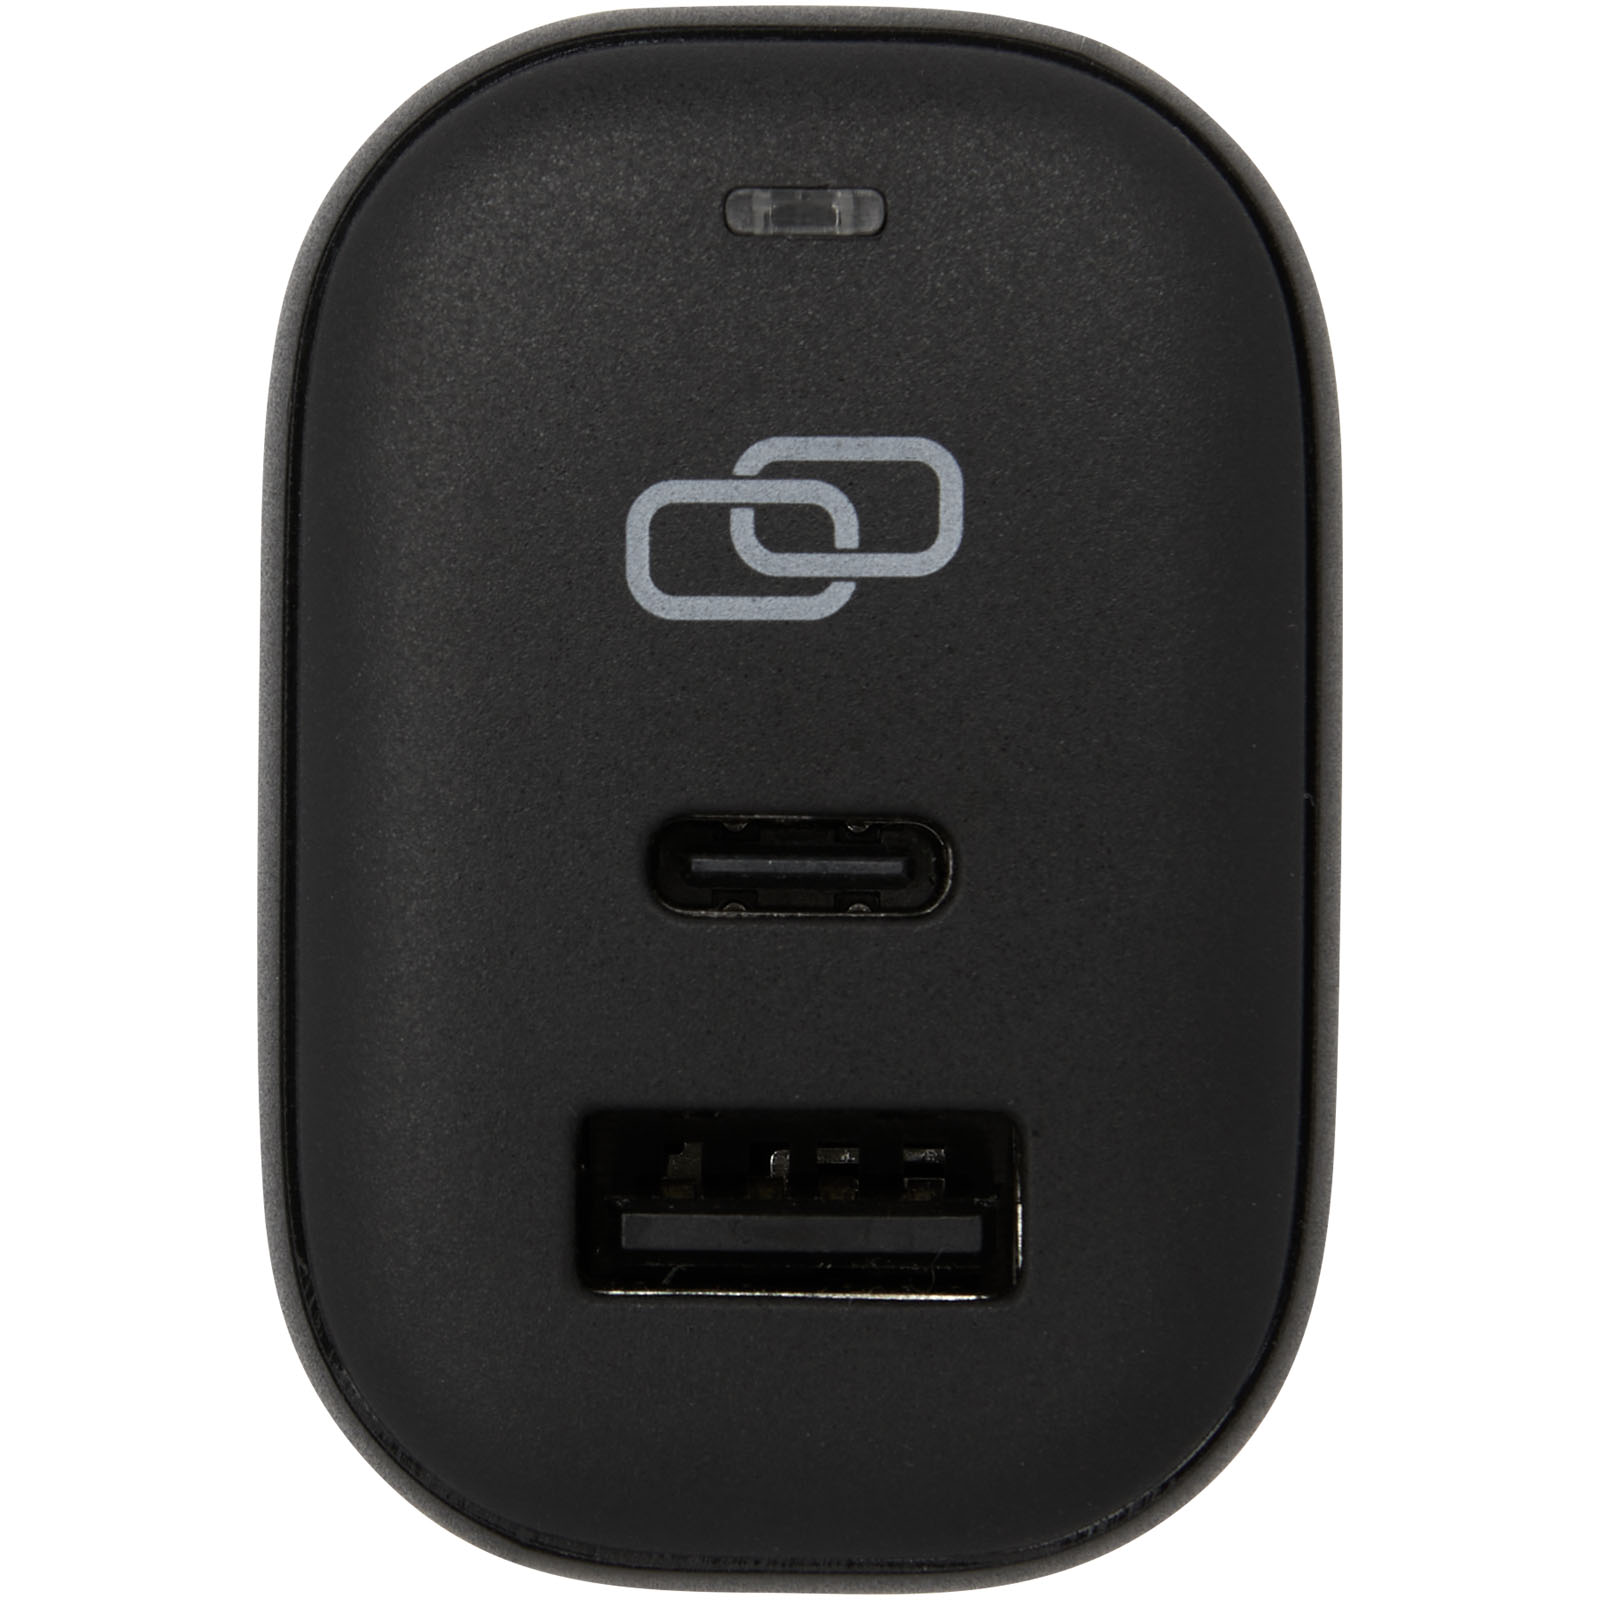 Advertising Chargers - ADAPT 25W recycled plastic PD travel charger - 5